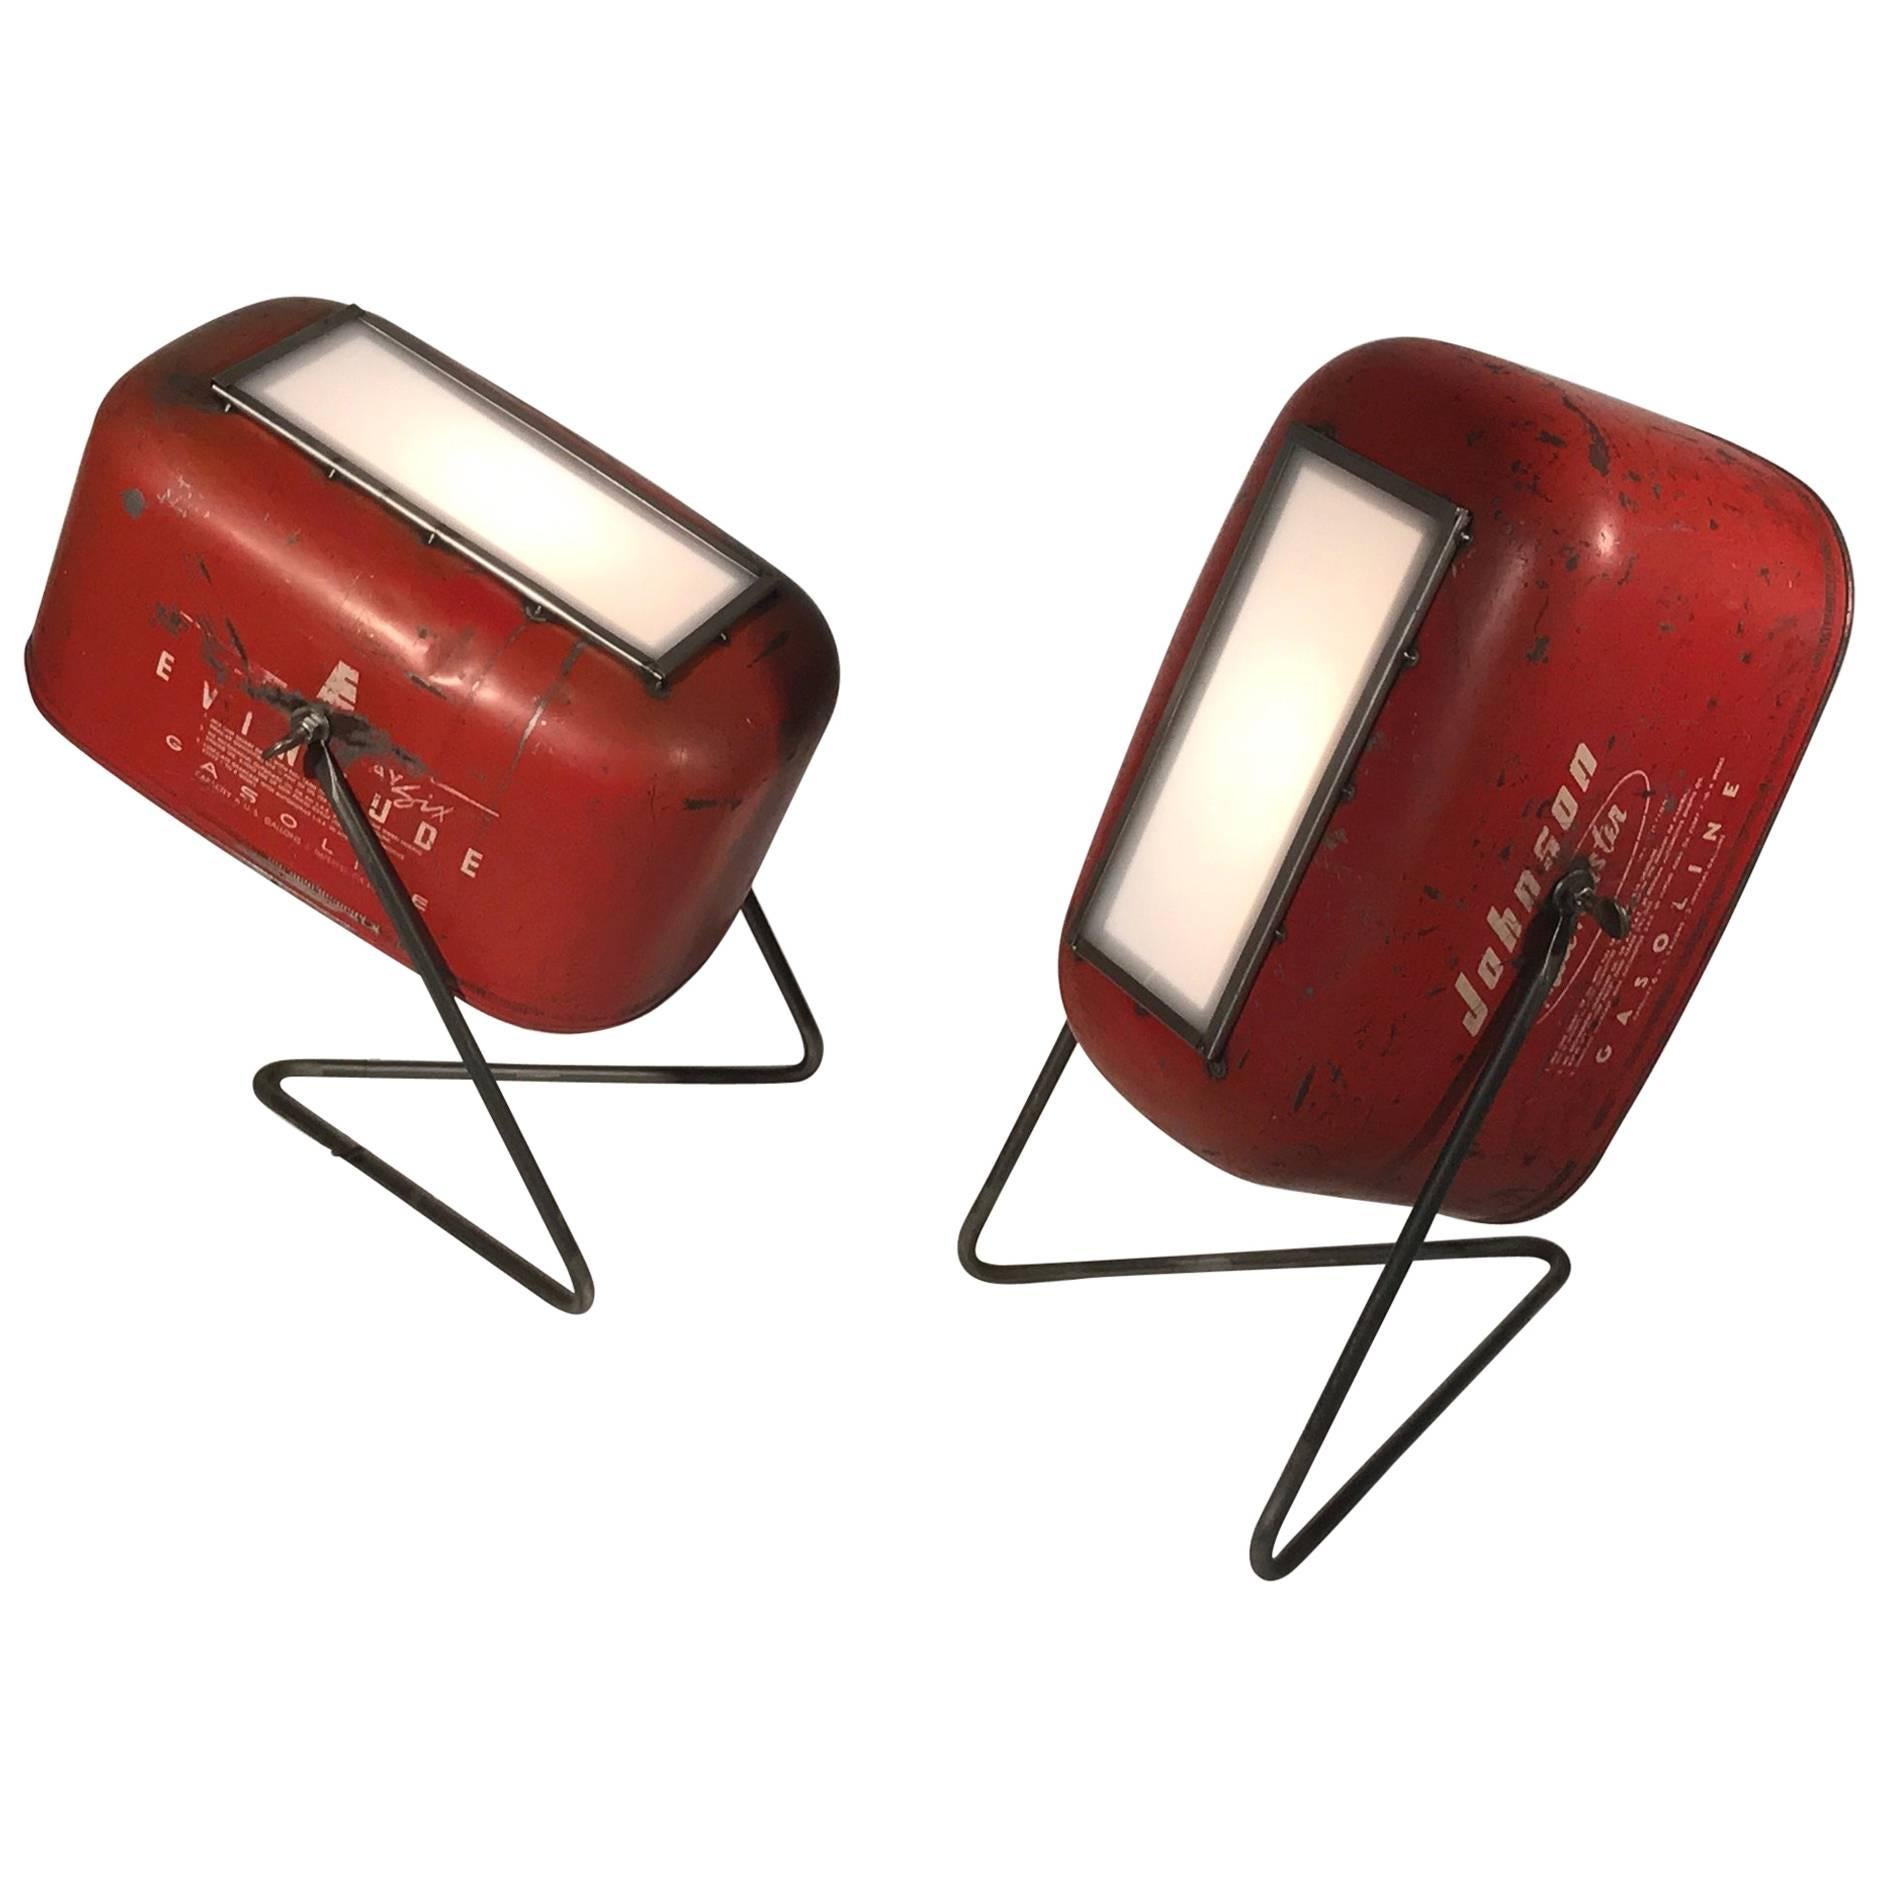 Artisan-created floor lamp spotlights made from early gas cans. The lamps are indoor-only. Each has a turn-switch on the back, and the front panels slide up to change out bulbs. Cords are approximate 7” long. The gas smell has been eradicated, and